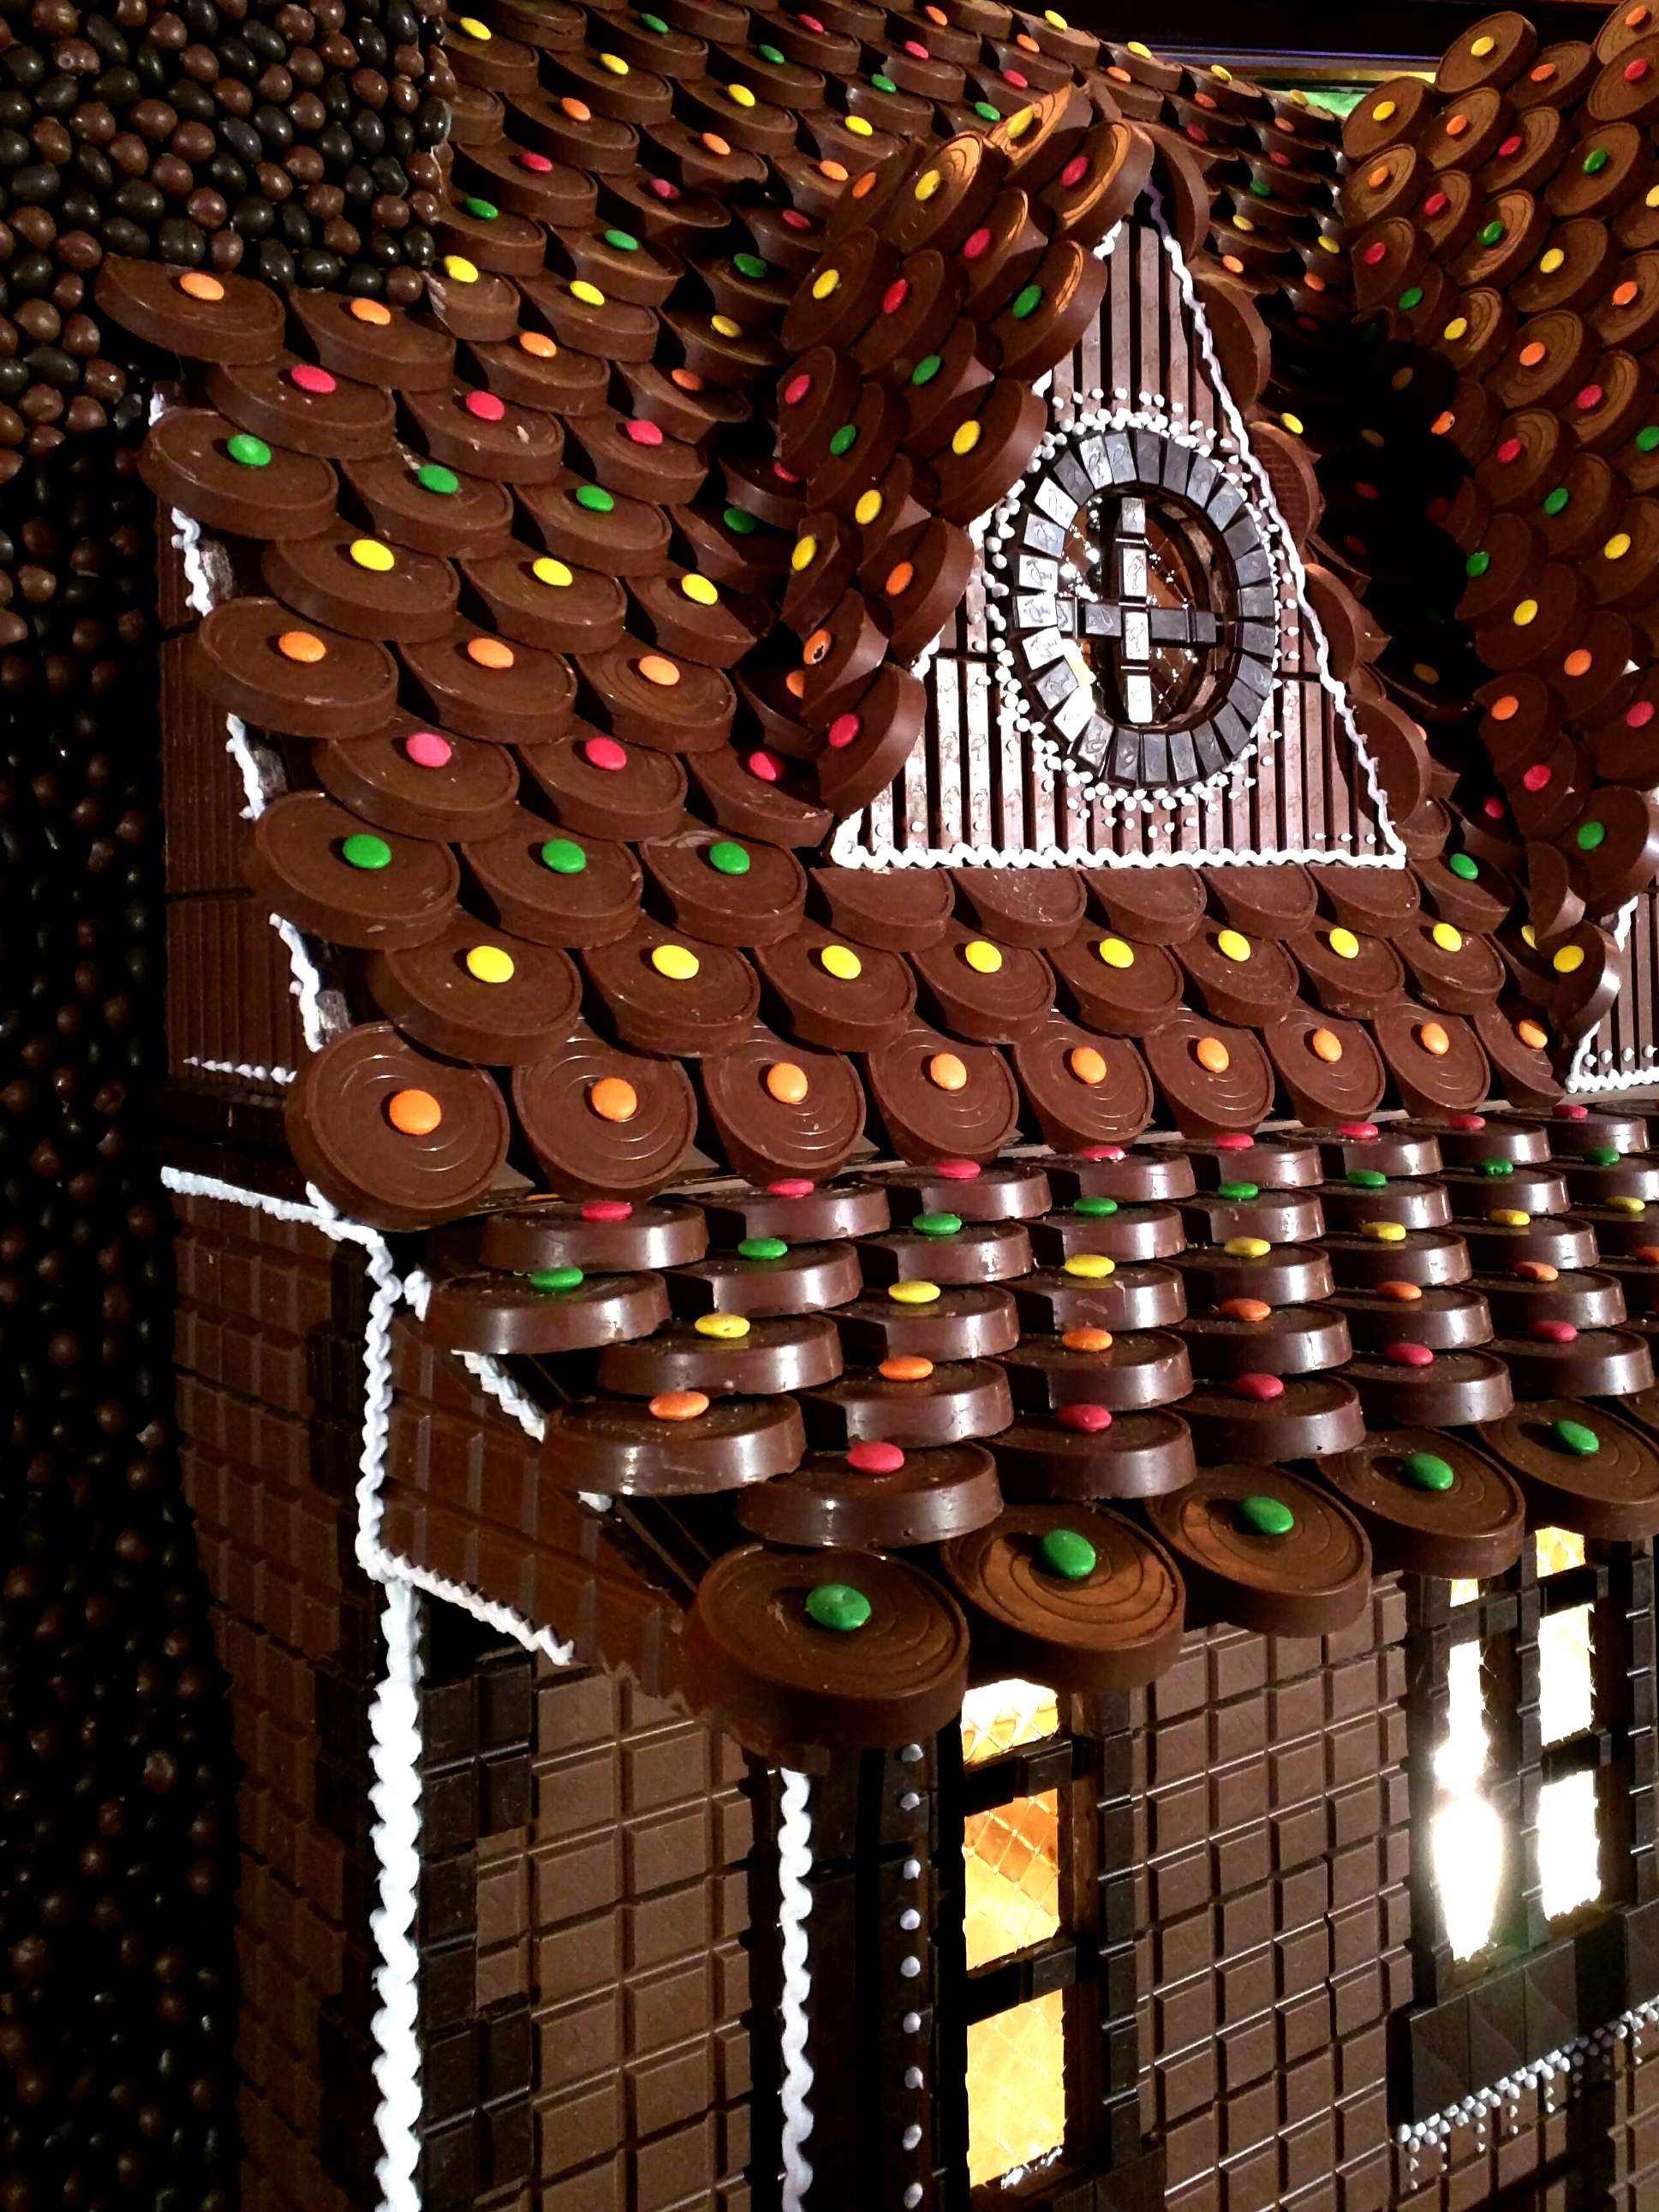 Details of Norway's largest chocolate house